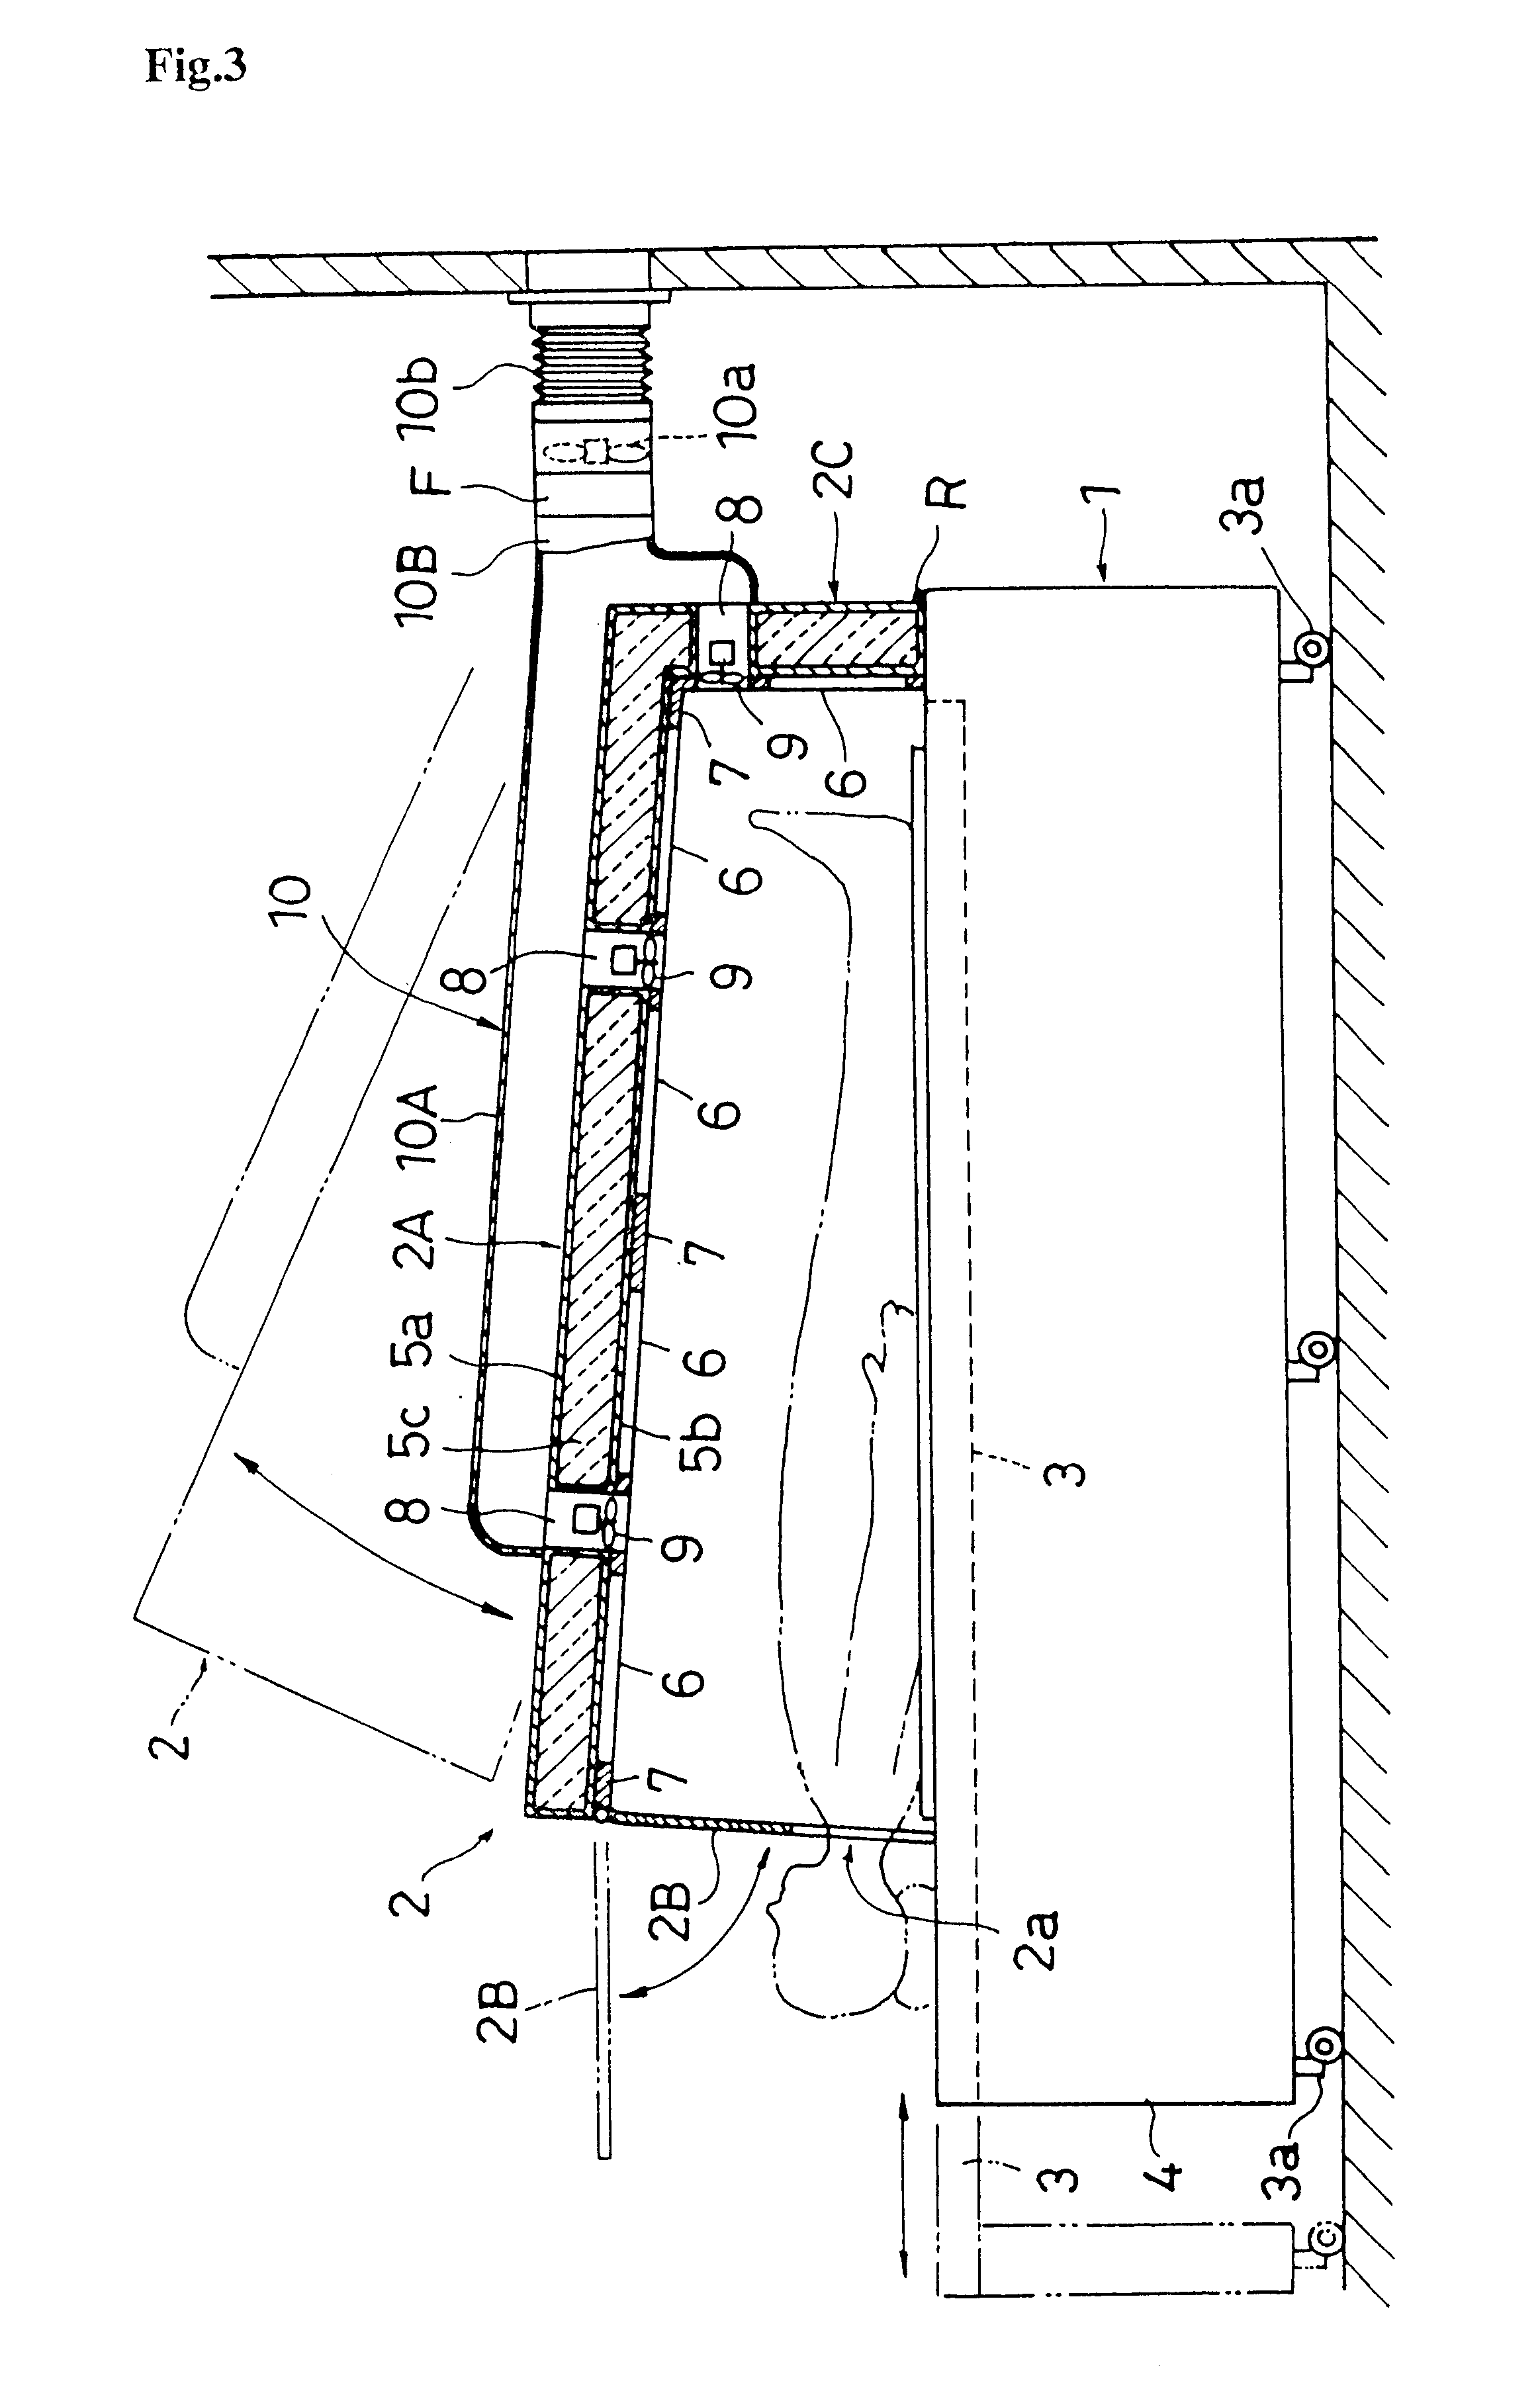 Whole body thermotherapy treatment apparatus